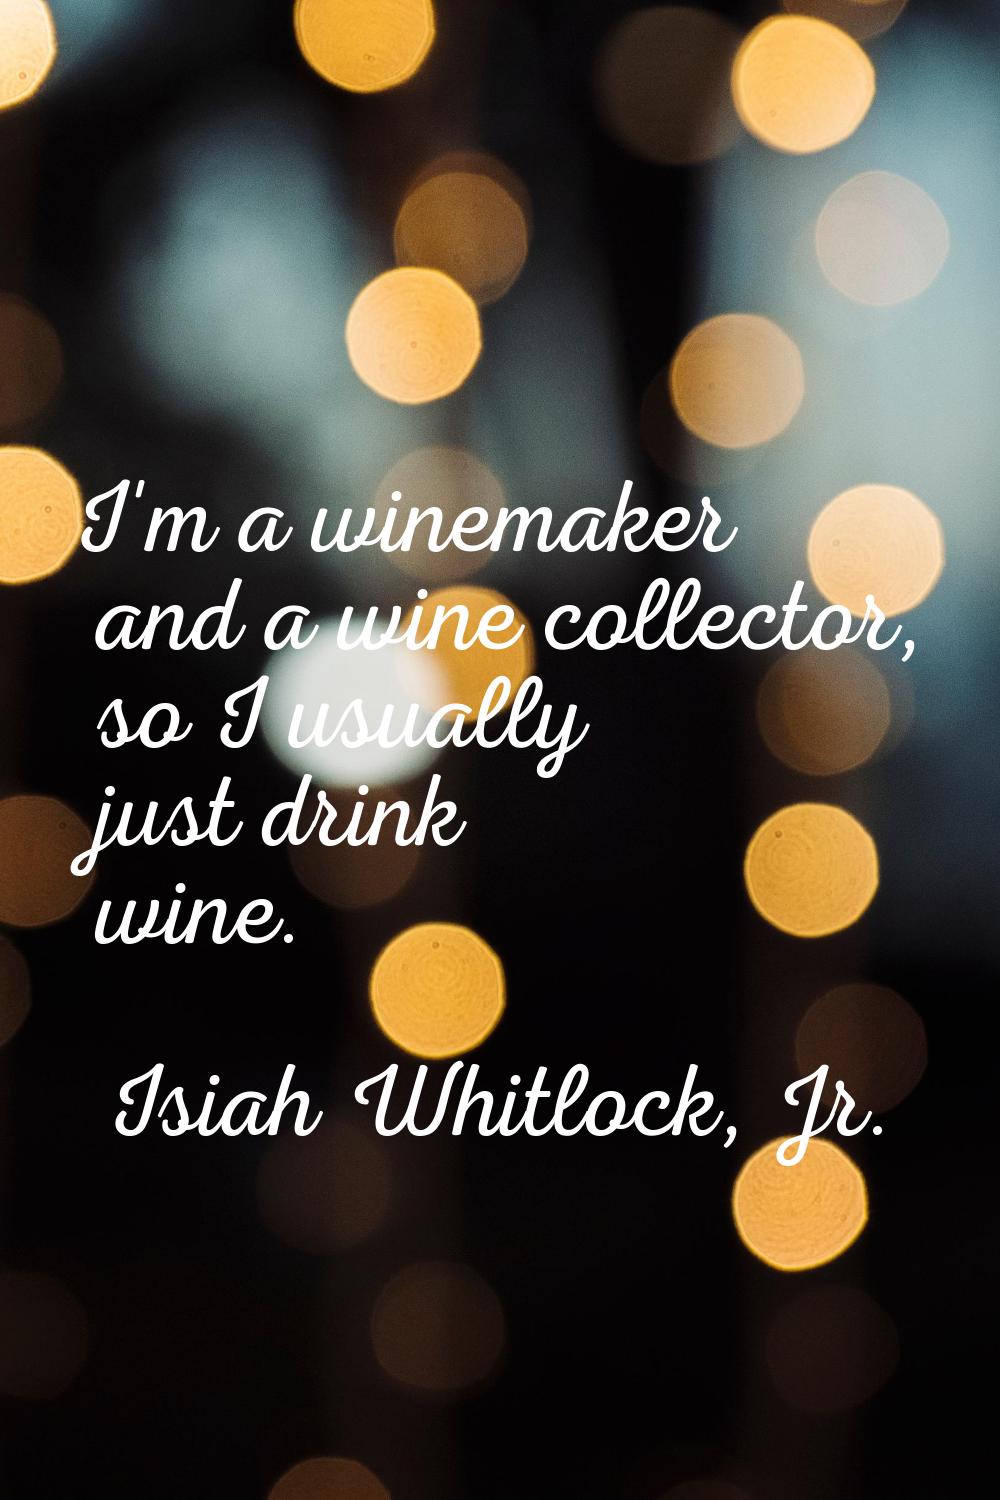 I'm a winemaker and a wine collector, so I usually just drink wine.